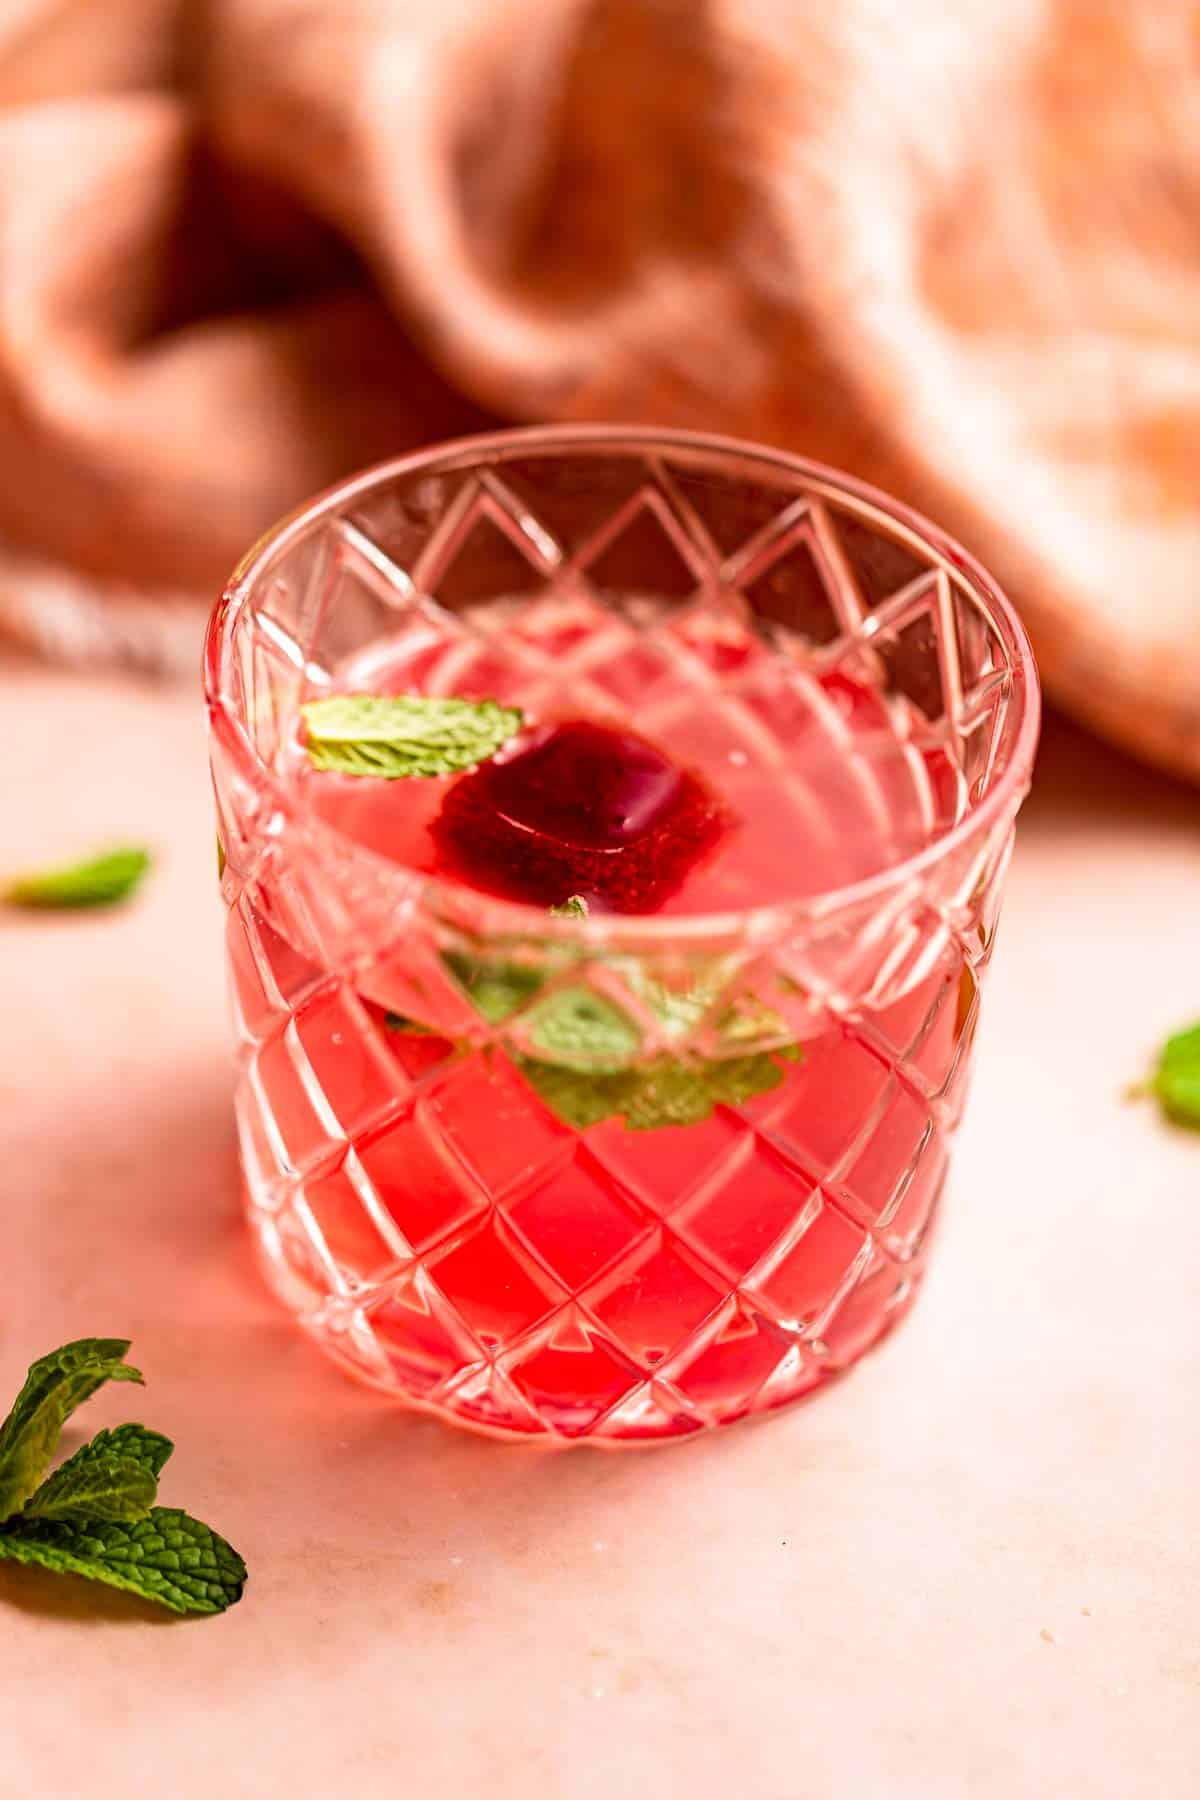 A cocktail glass filled with pink-orange water, a blood orange ice cube, and mint leaves.